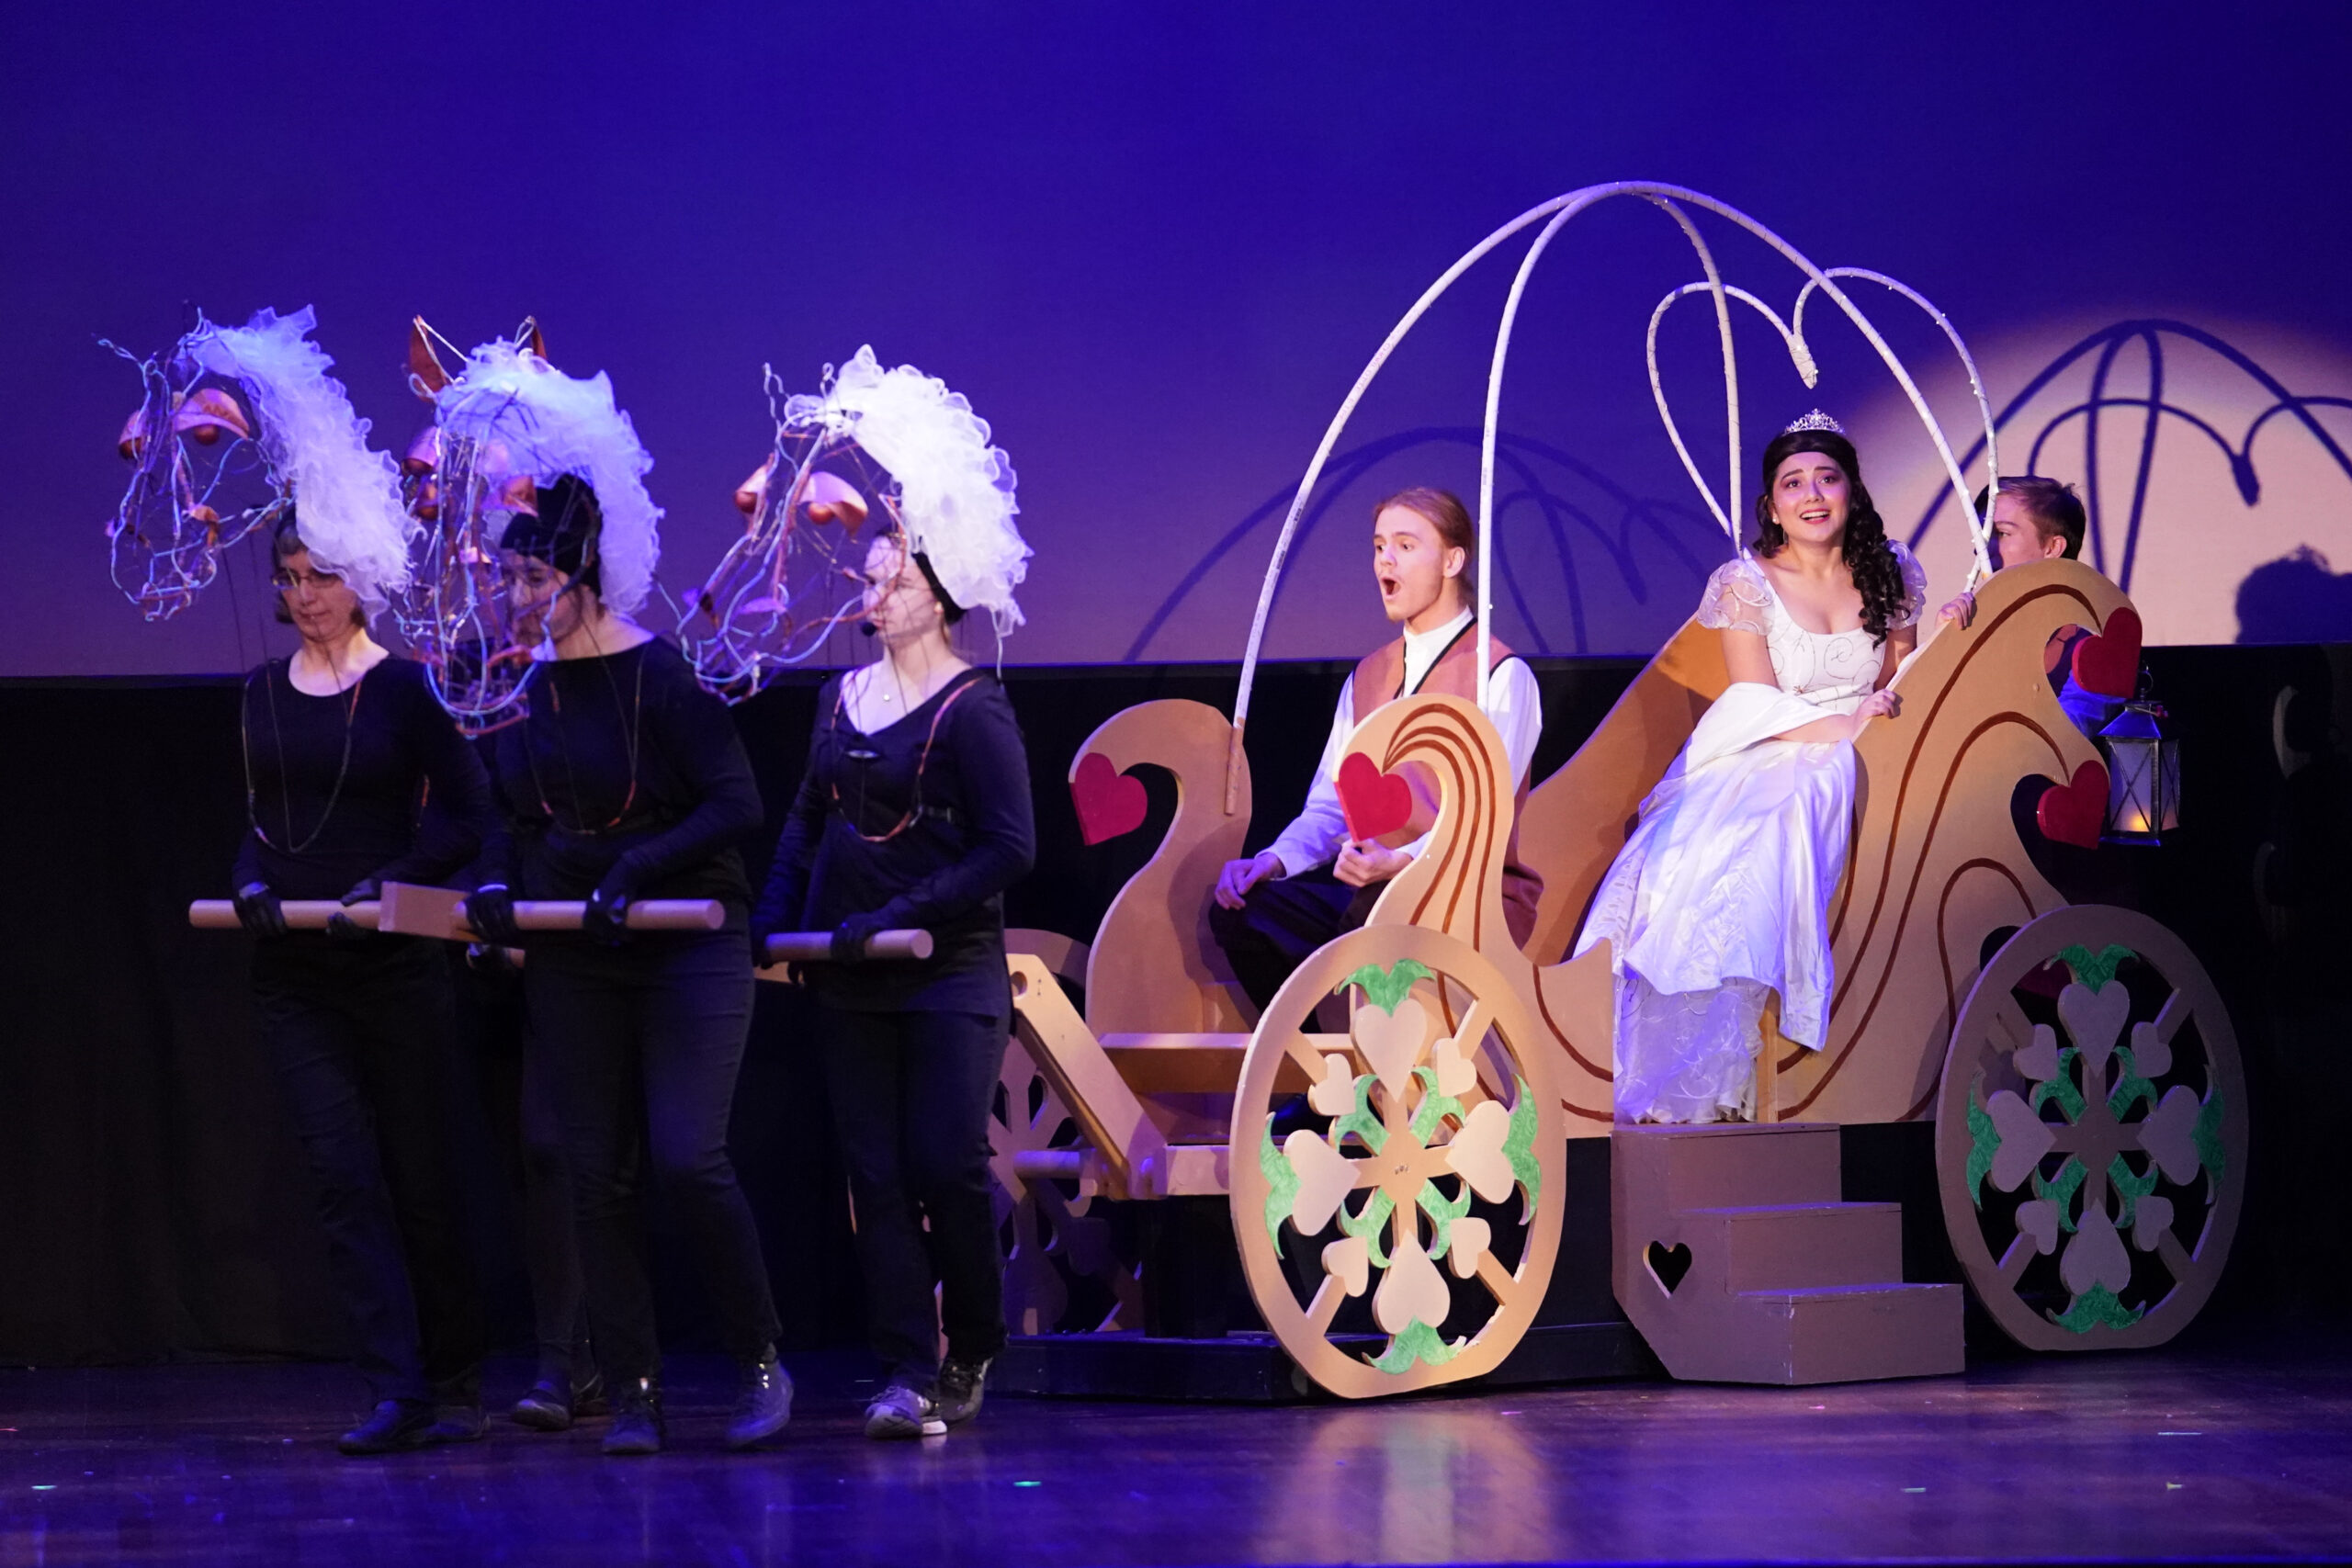 Scene from the Cinderella Play at Pentacle Theatre